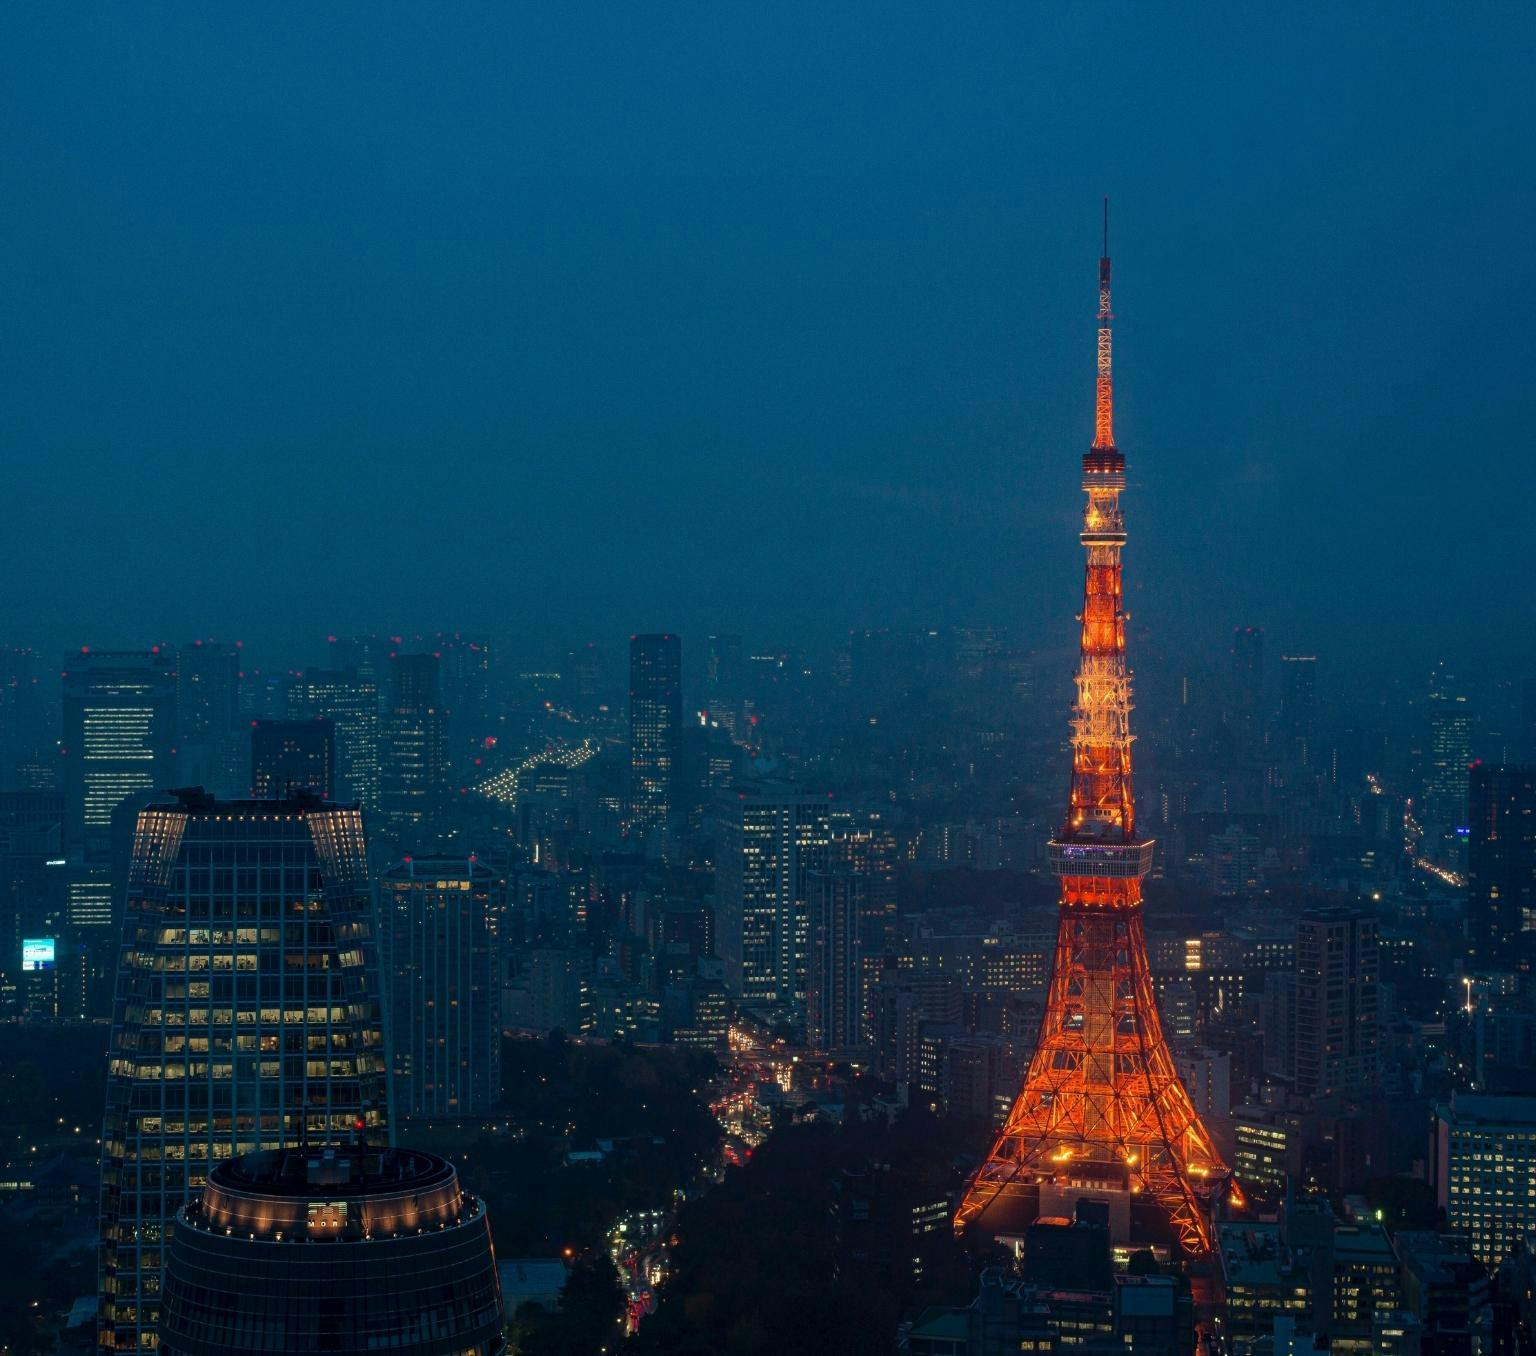 Tokyo tower which is red and lit with orange lights is pictured above the tokyo skyline at dusk